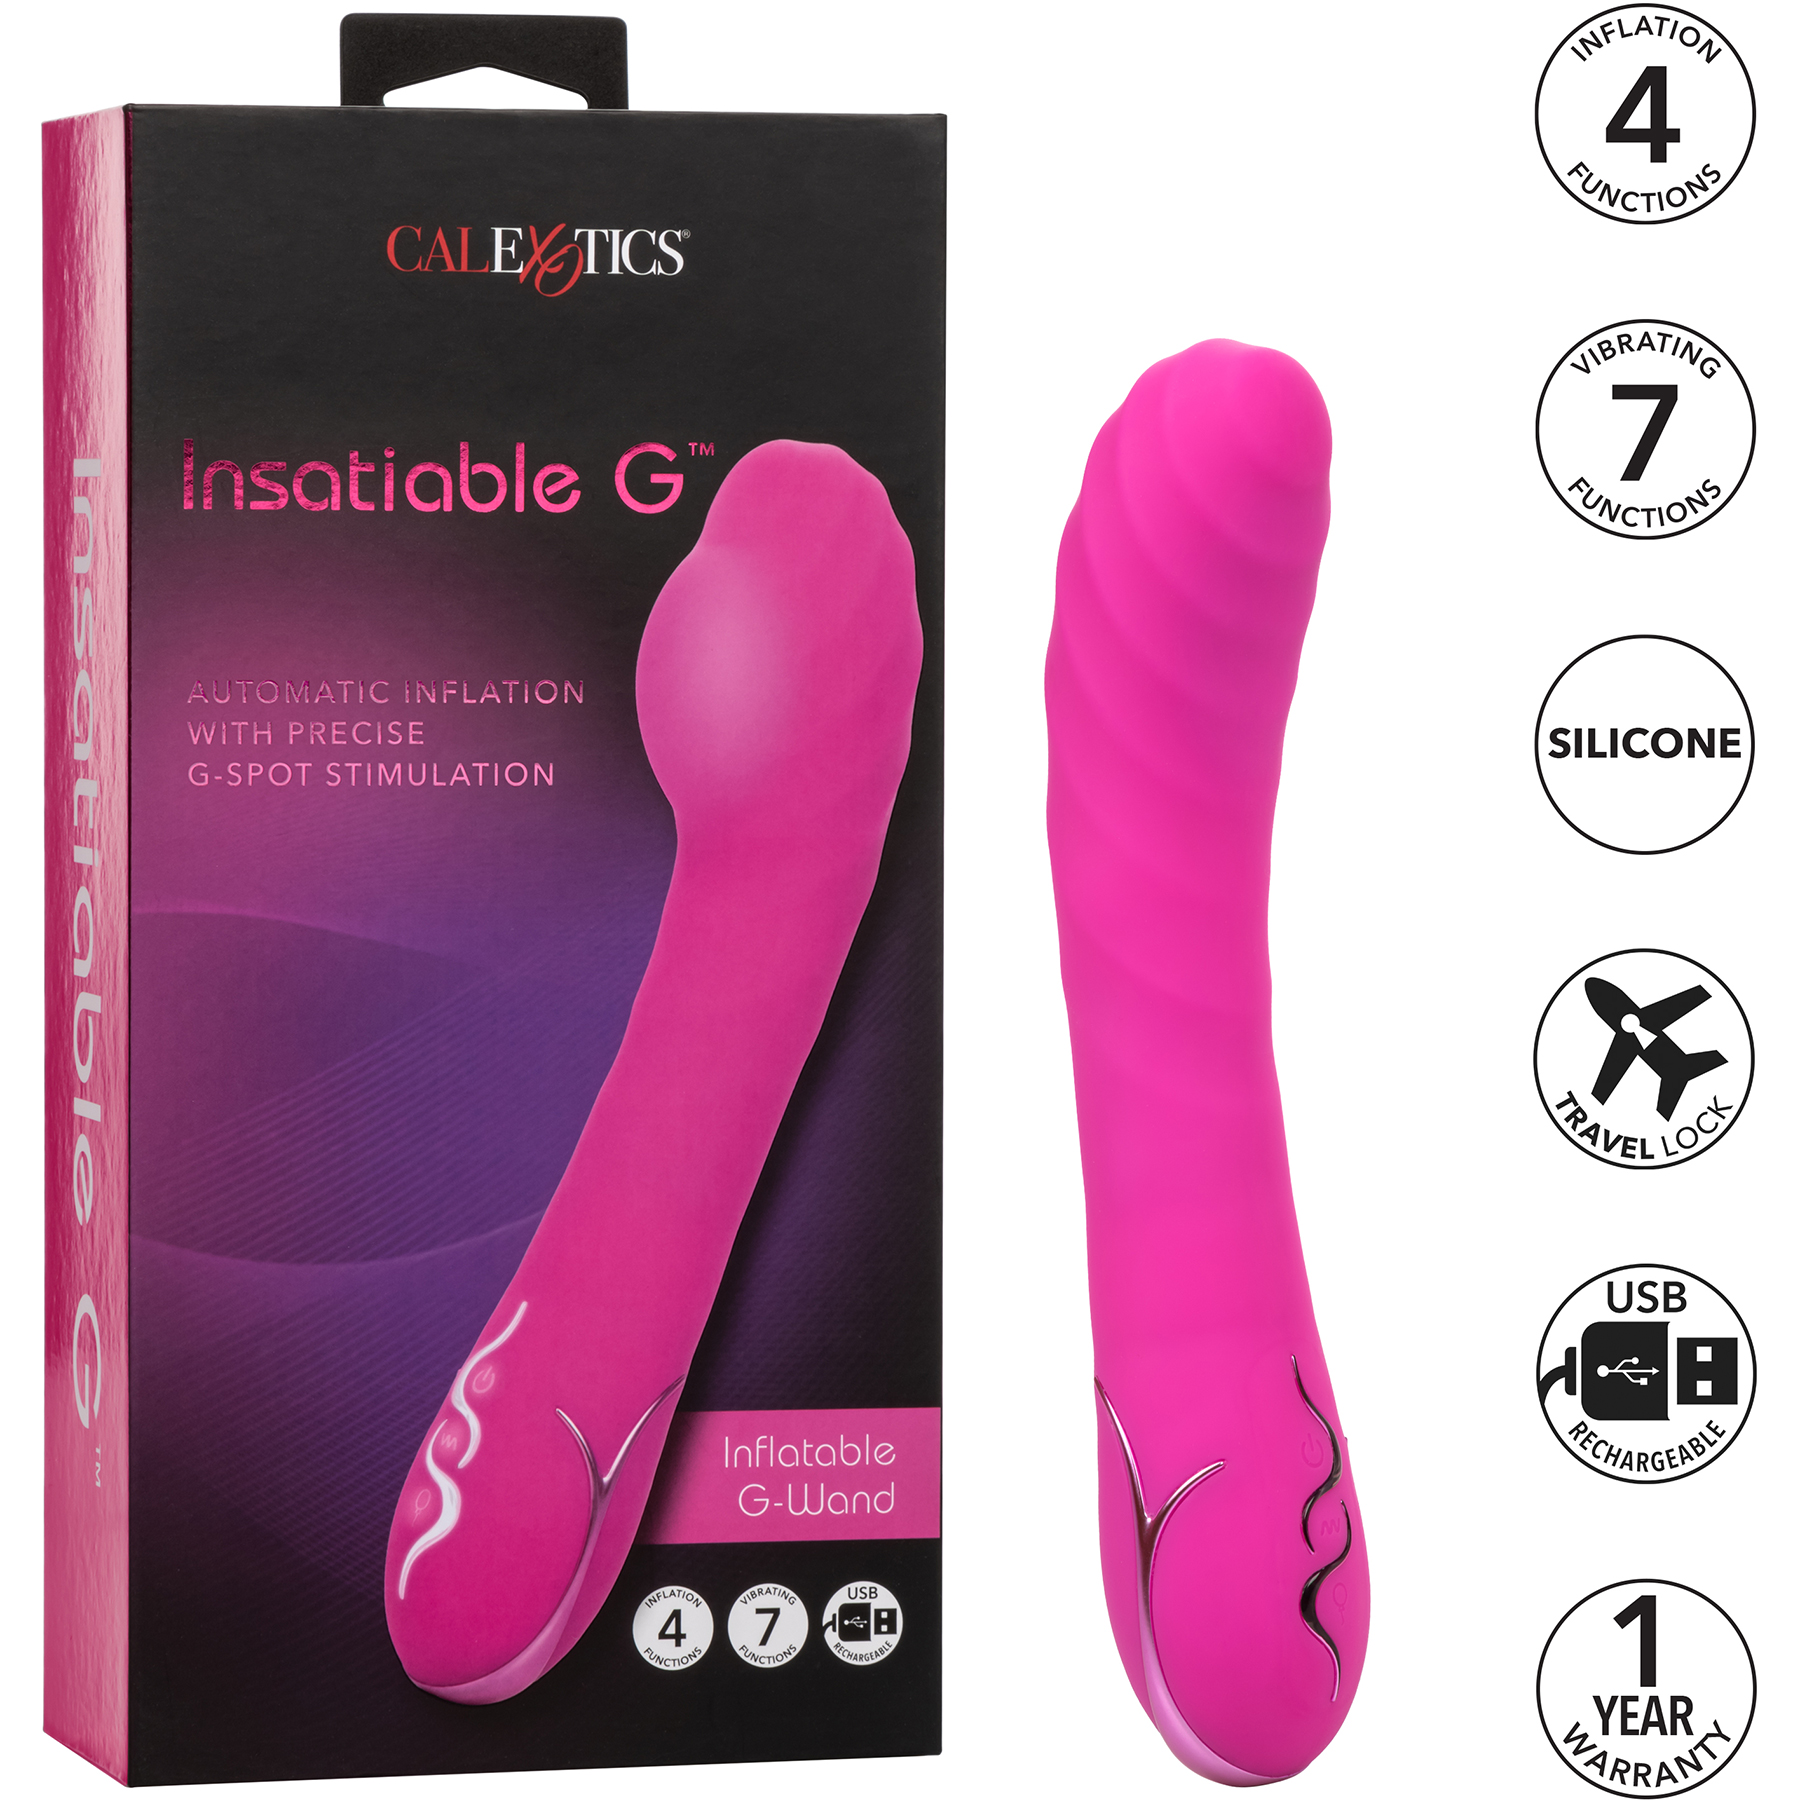  Insatiable G Inflatable G-Wand Silicone Rechargeable G-Spot Vibrator - Features